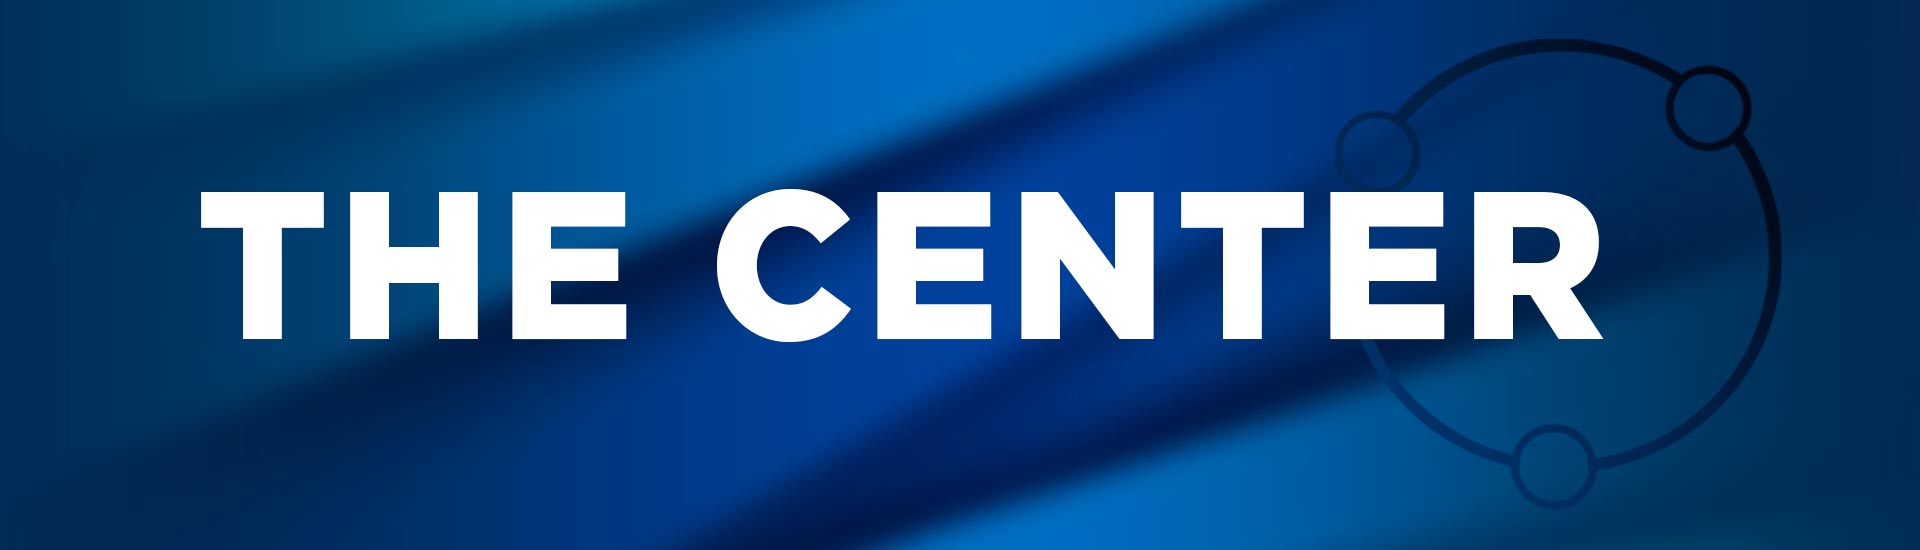 The Center on a blue background